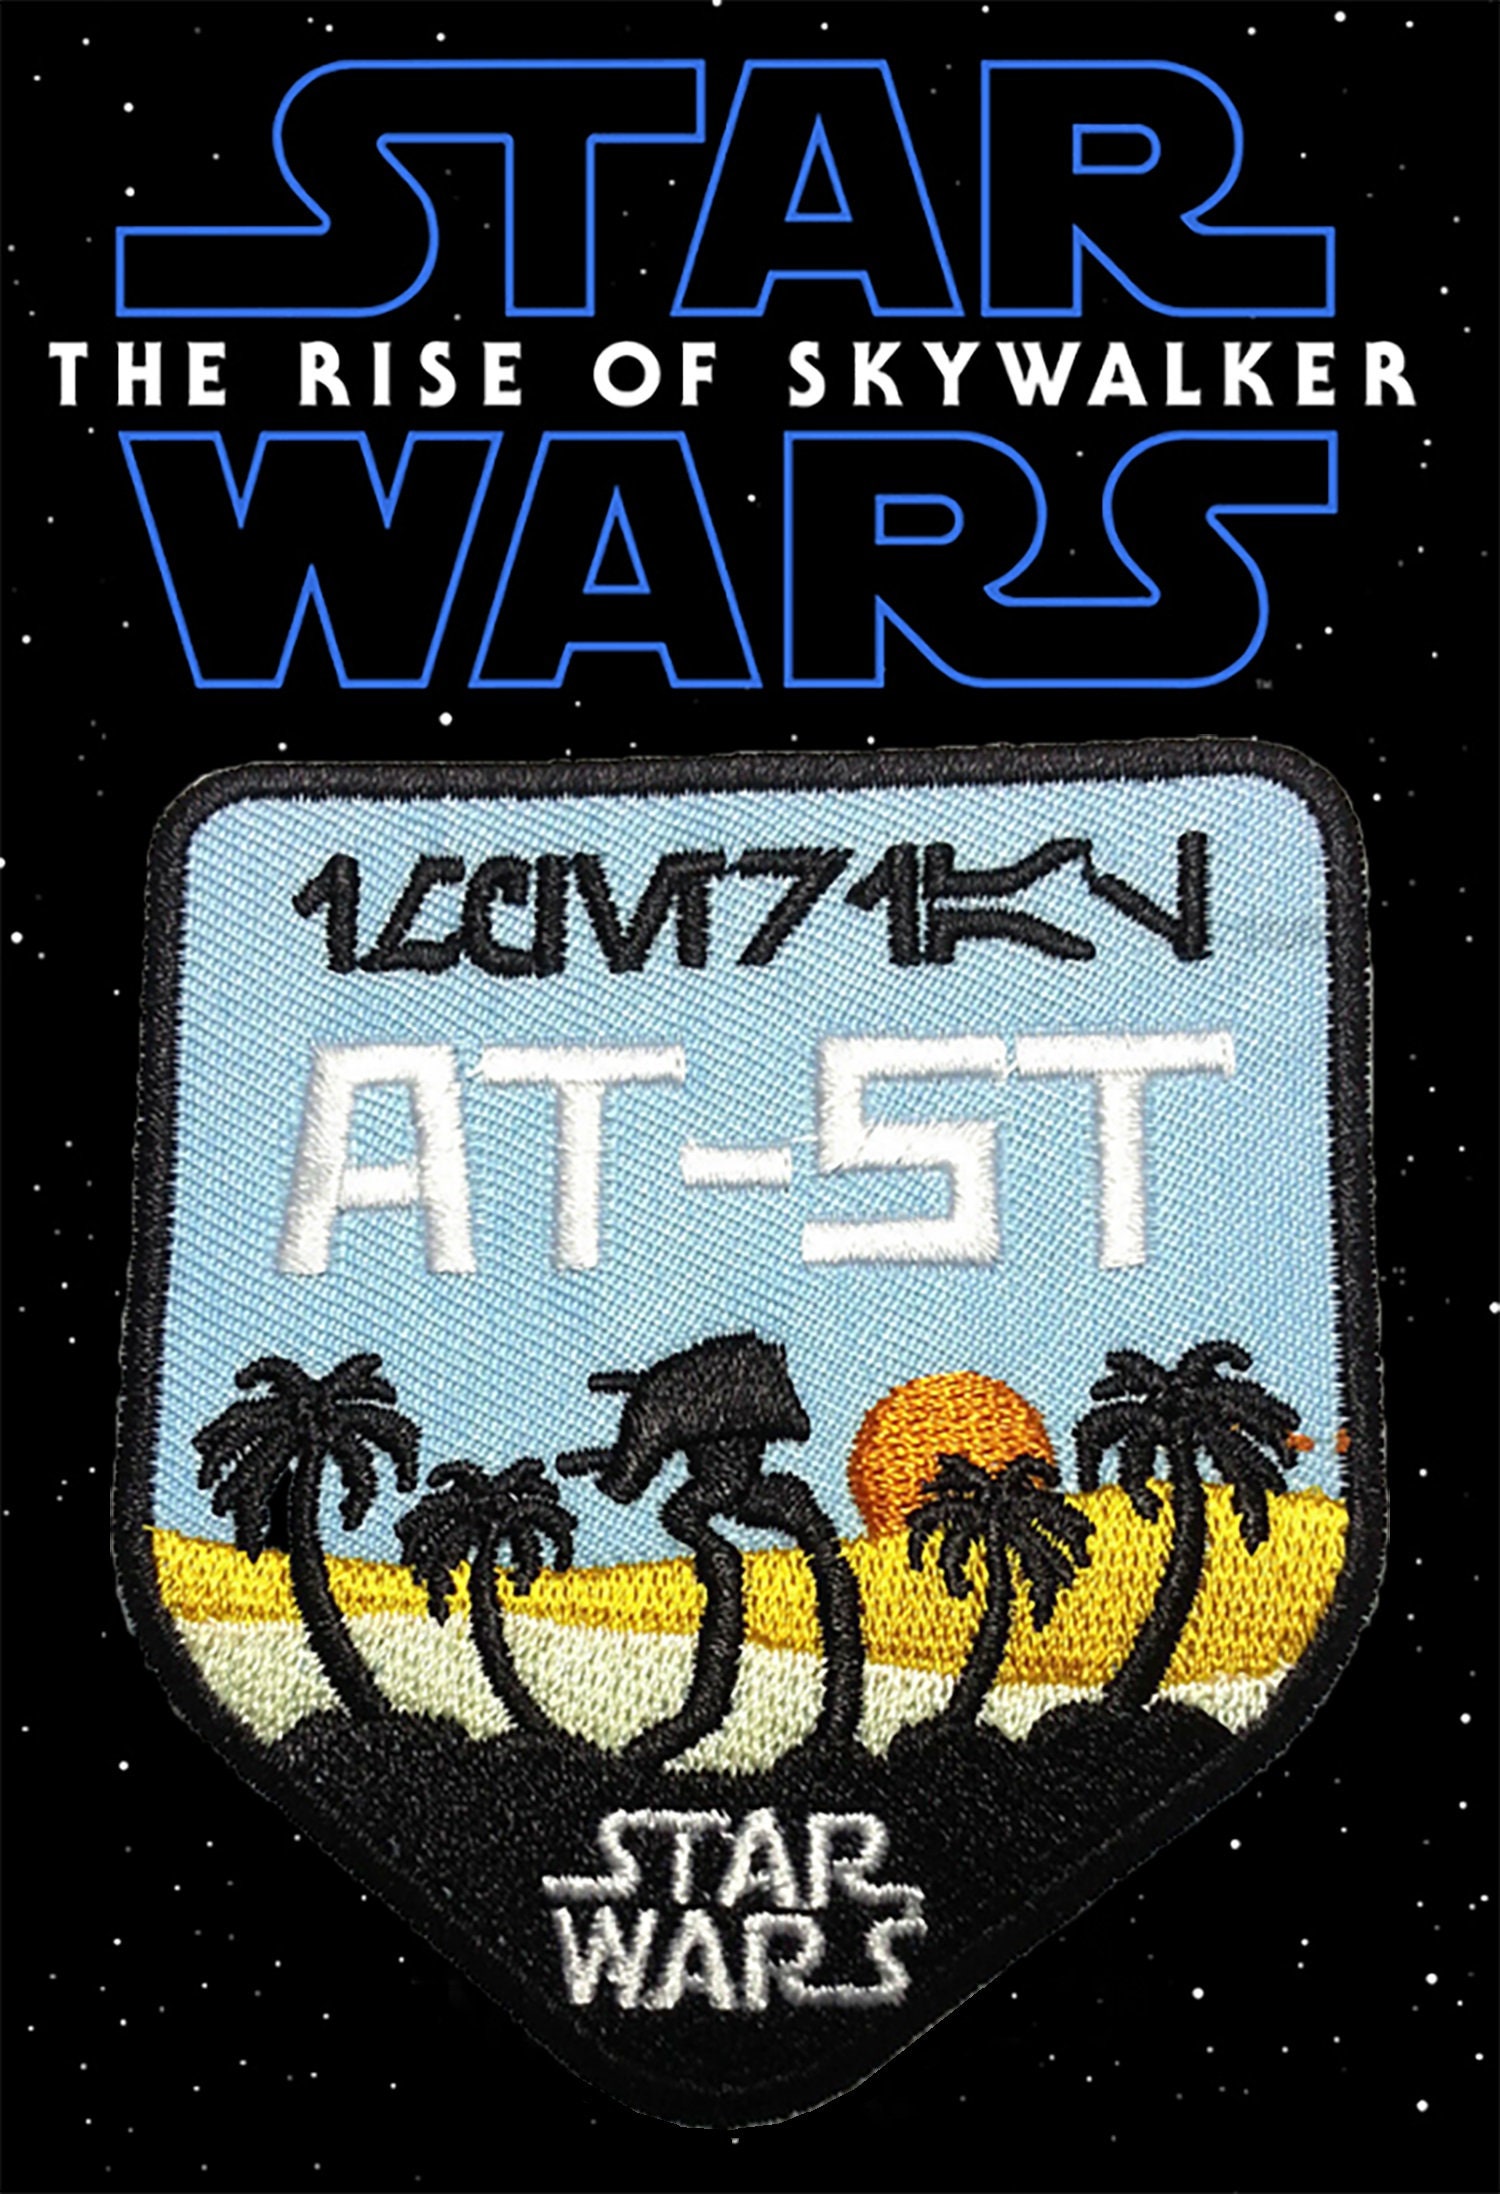 Disney Star Wars Walker AT-ST Badge Patch Officially Licensed Iron